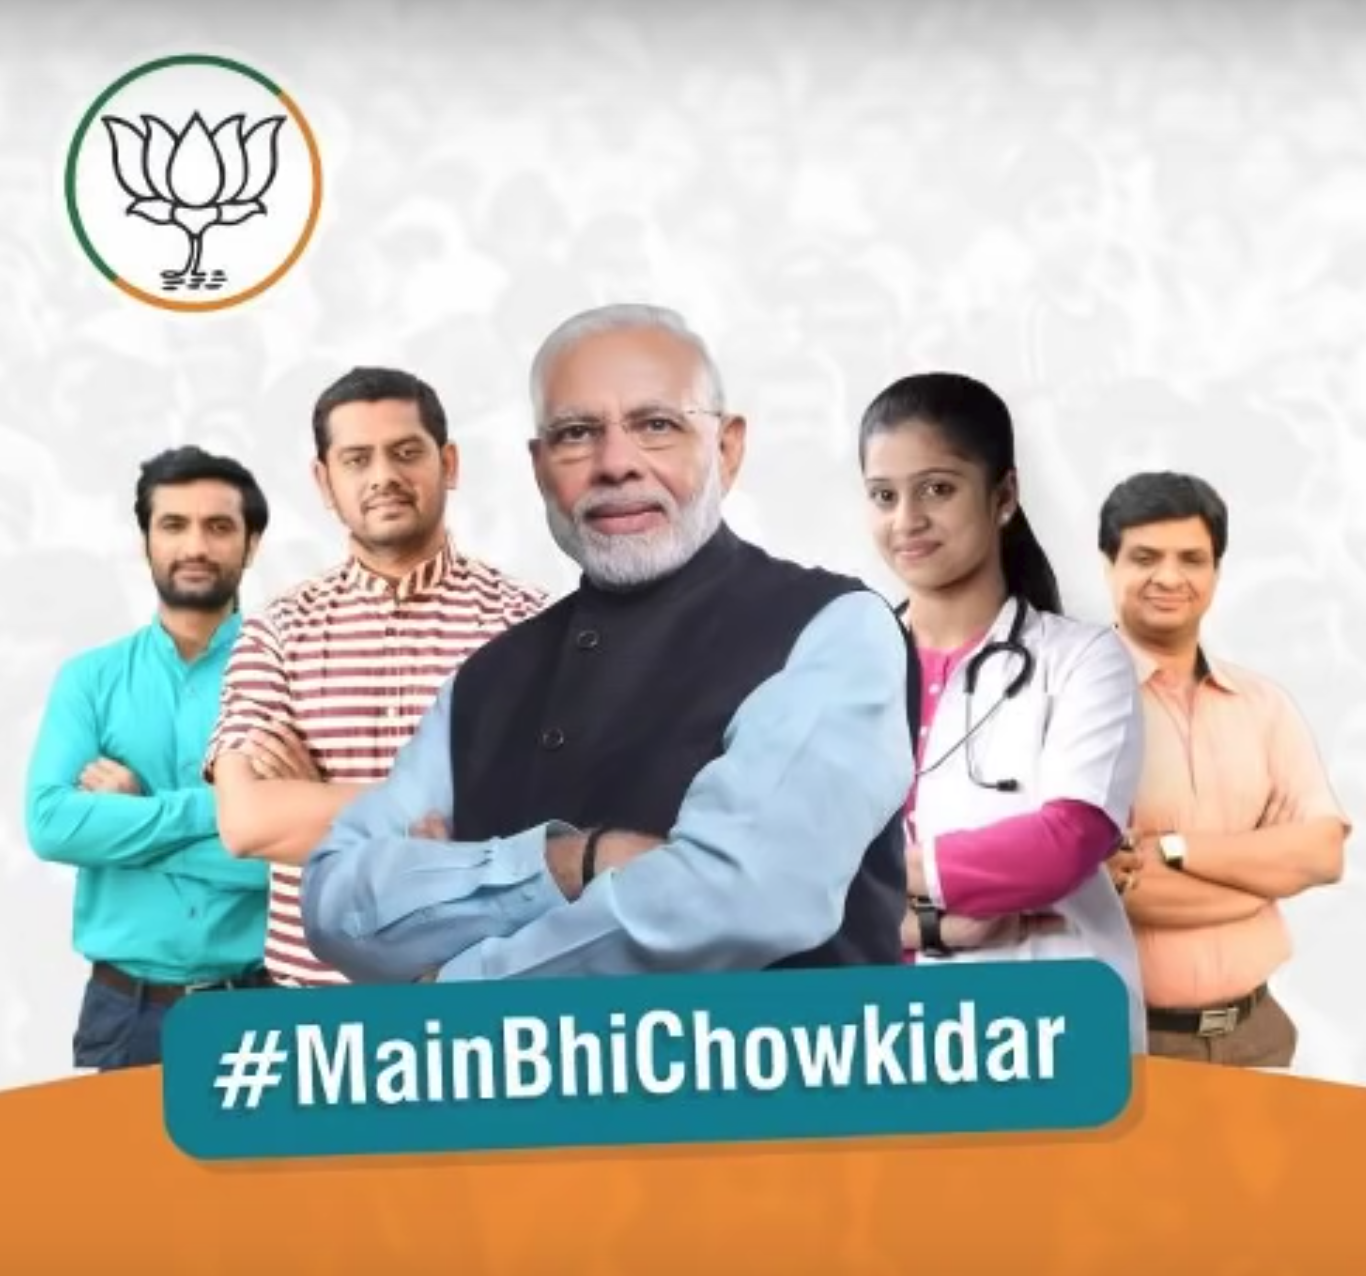 #MainbhiChowkidar is a Commitment and a Devotion, not a slogan or an affiliation!